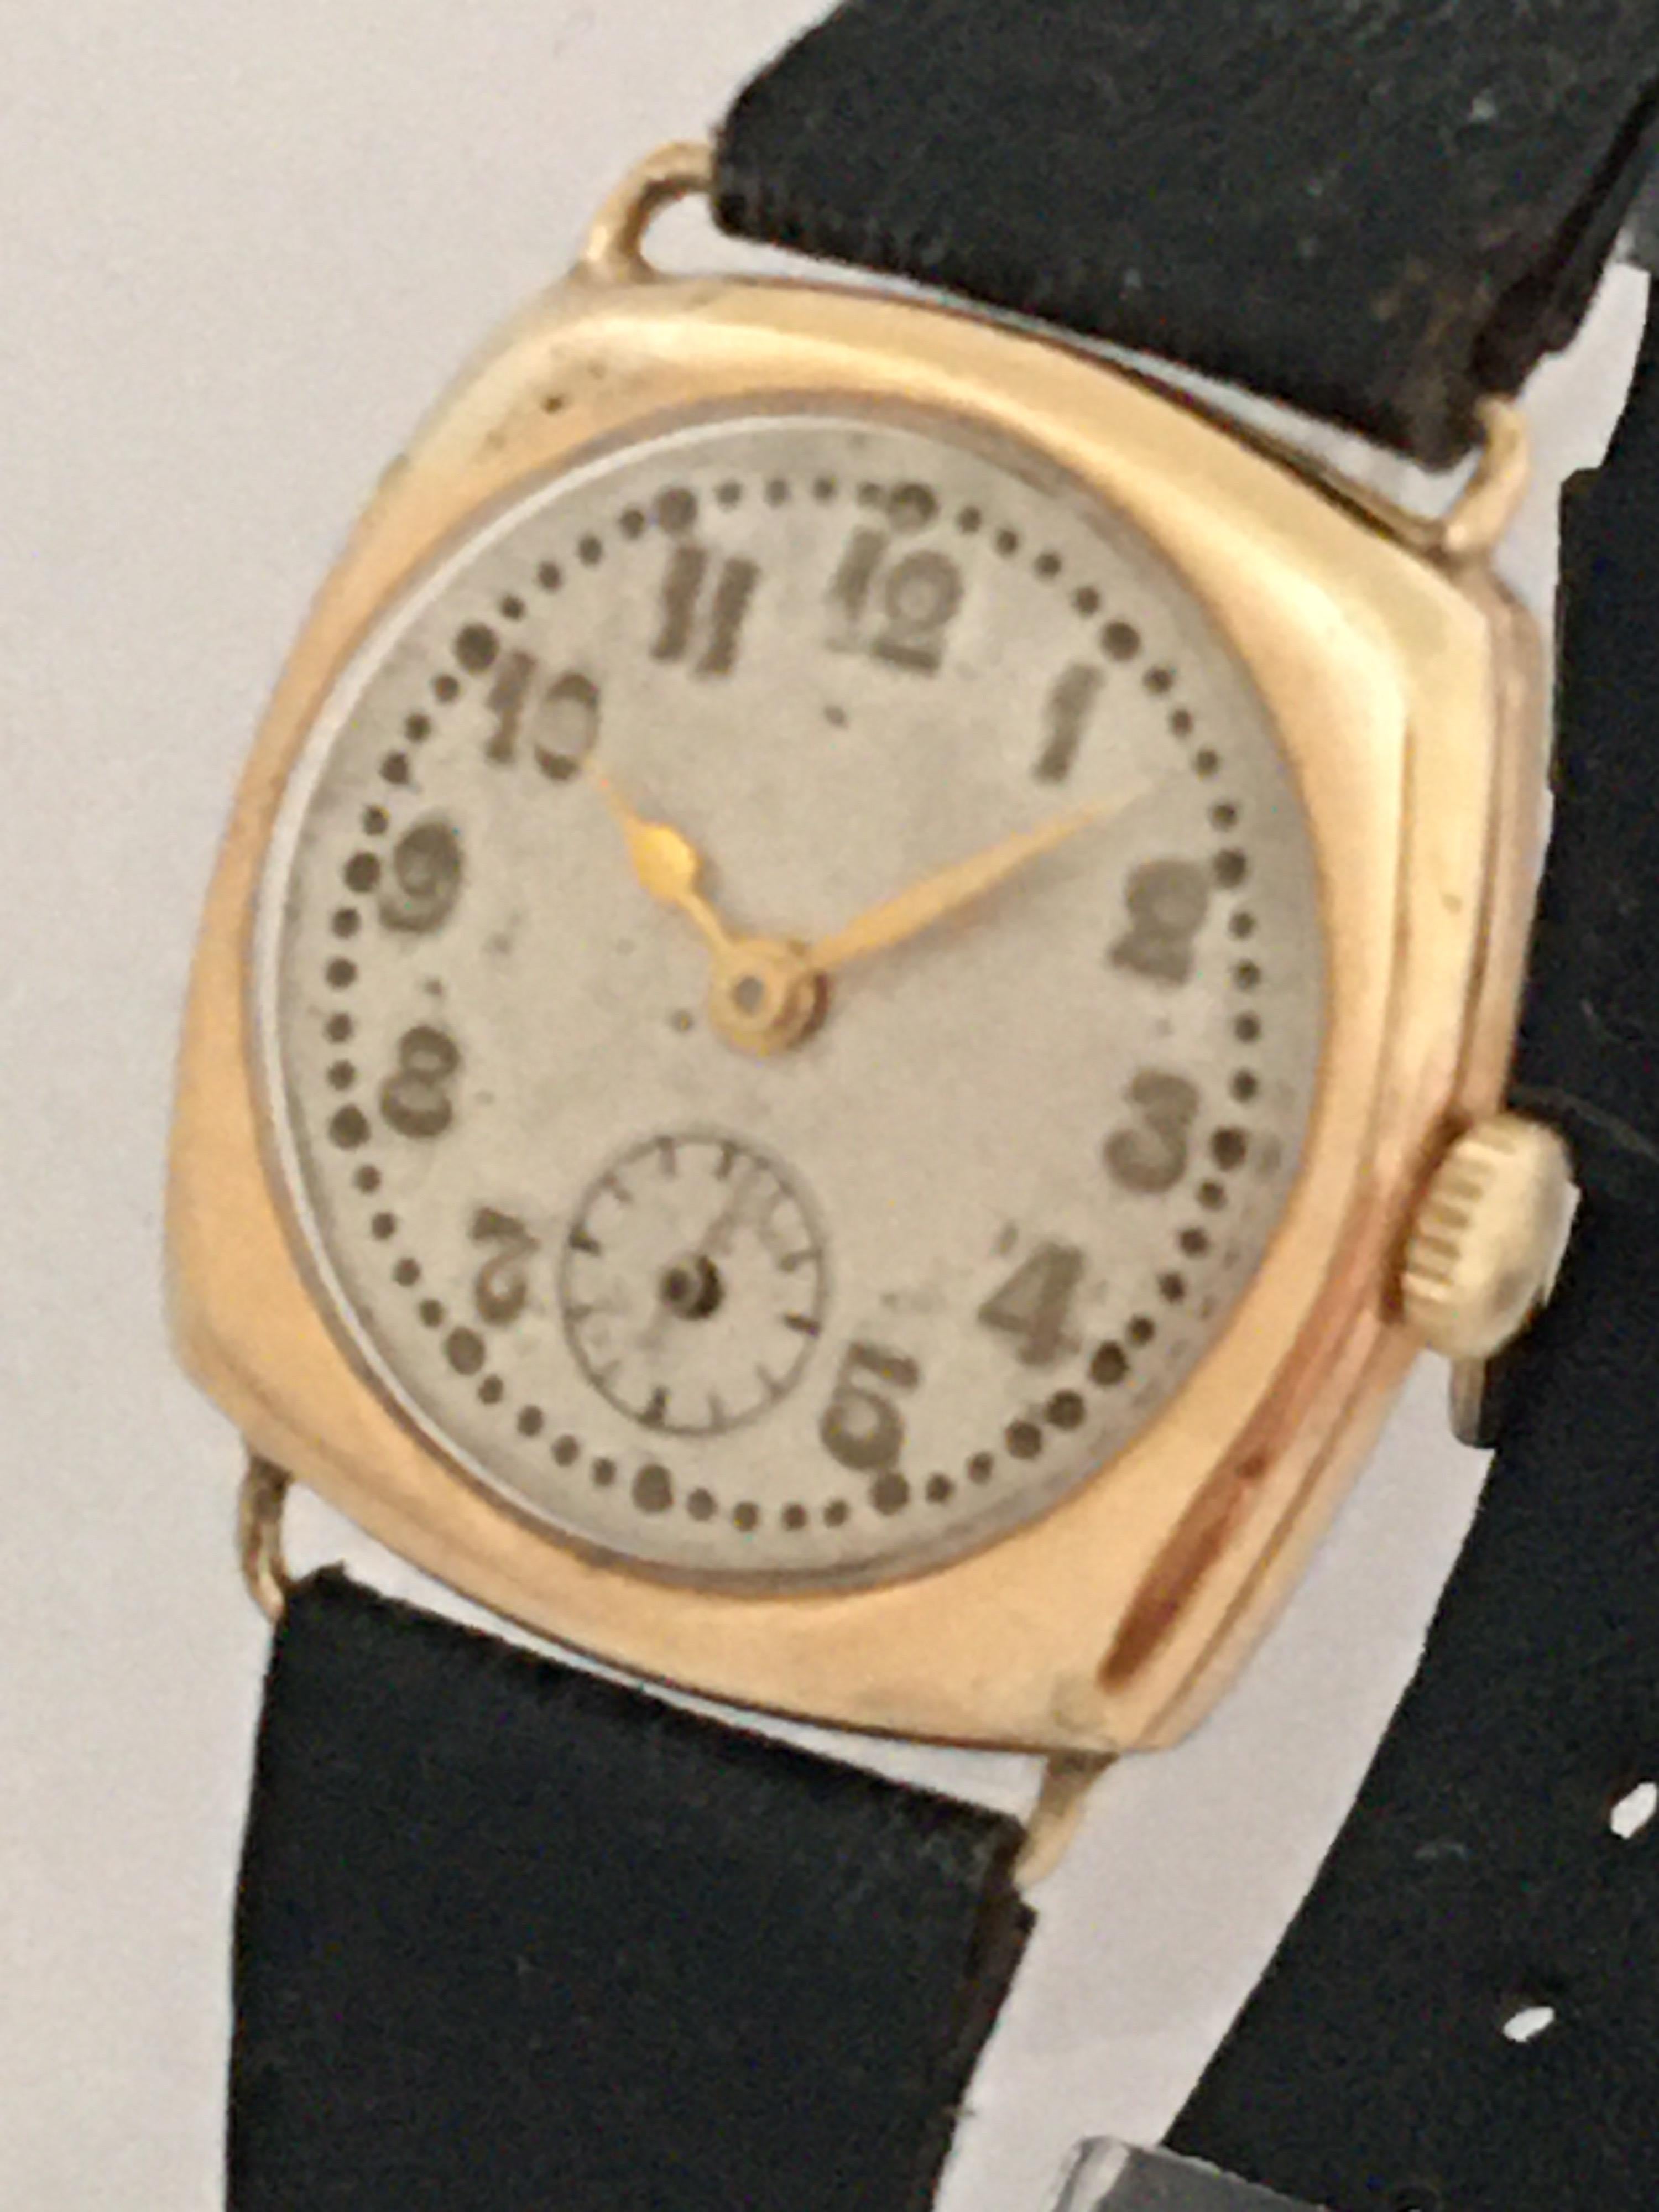 This is a beautiful example of a 1950’s cushion Watch signed HERA on the movement. 

This watch is in good working condition and it is ticking well. Visible signs of used and ageing with the dial is a bit tired few tiny dents, scratches and worn on